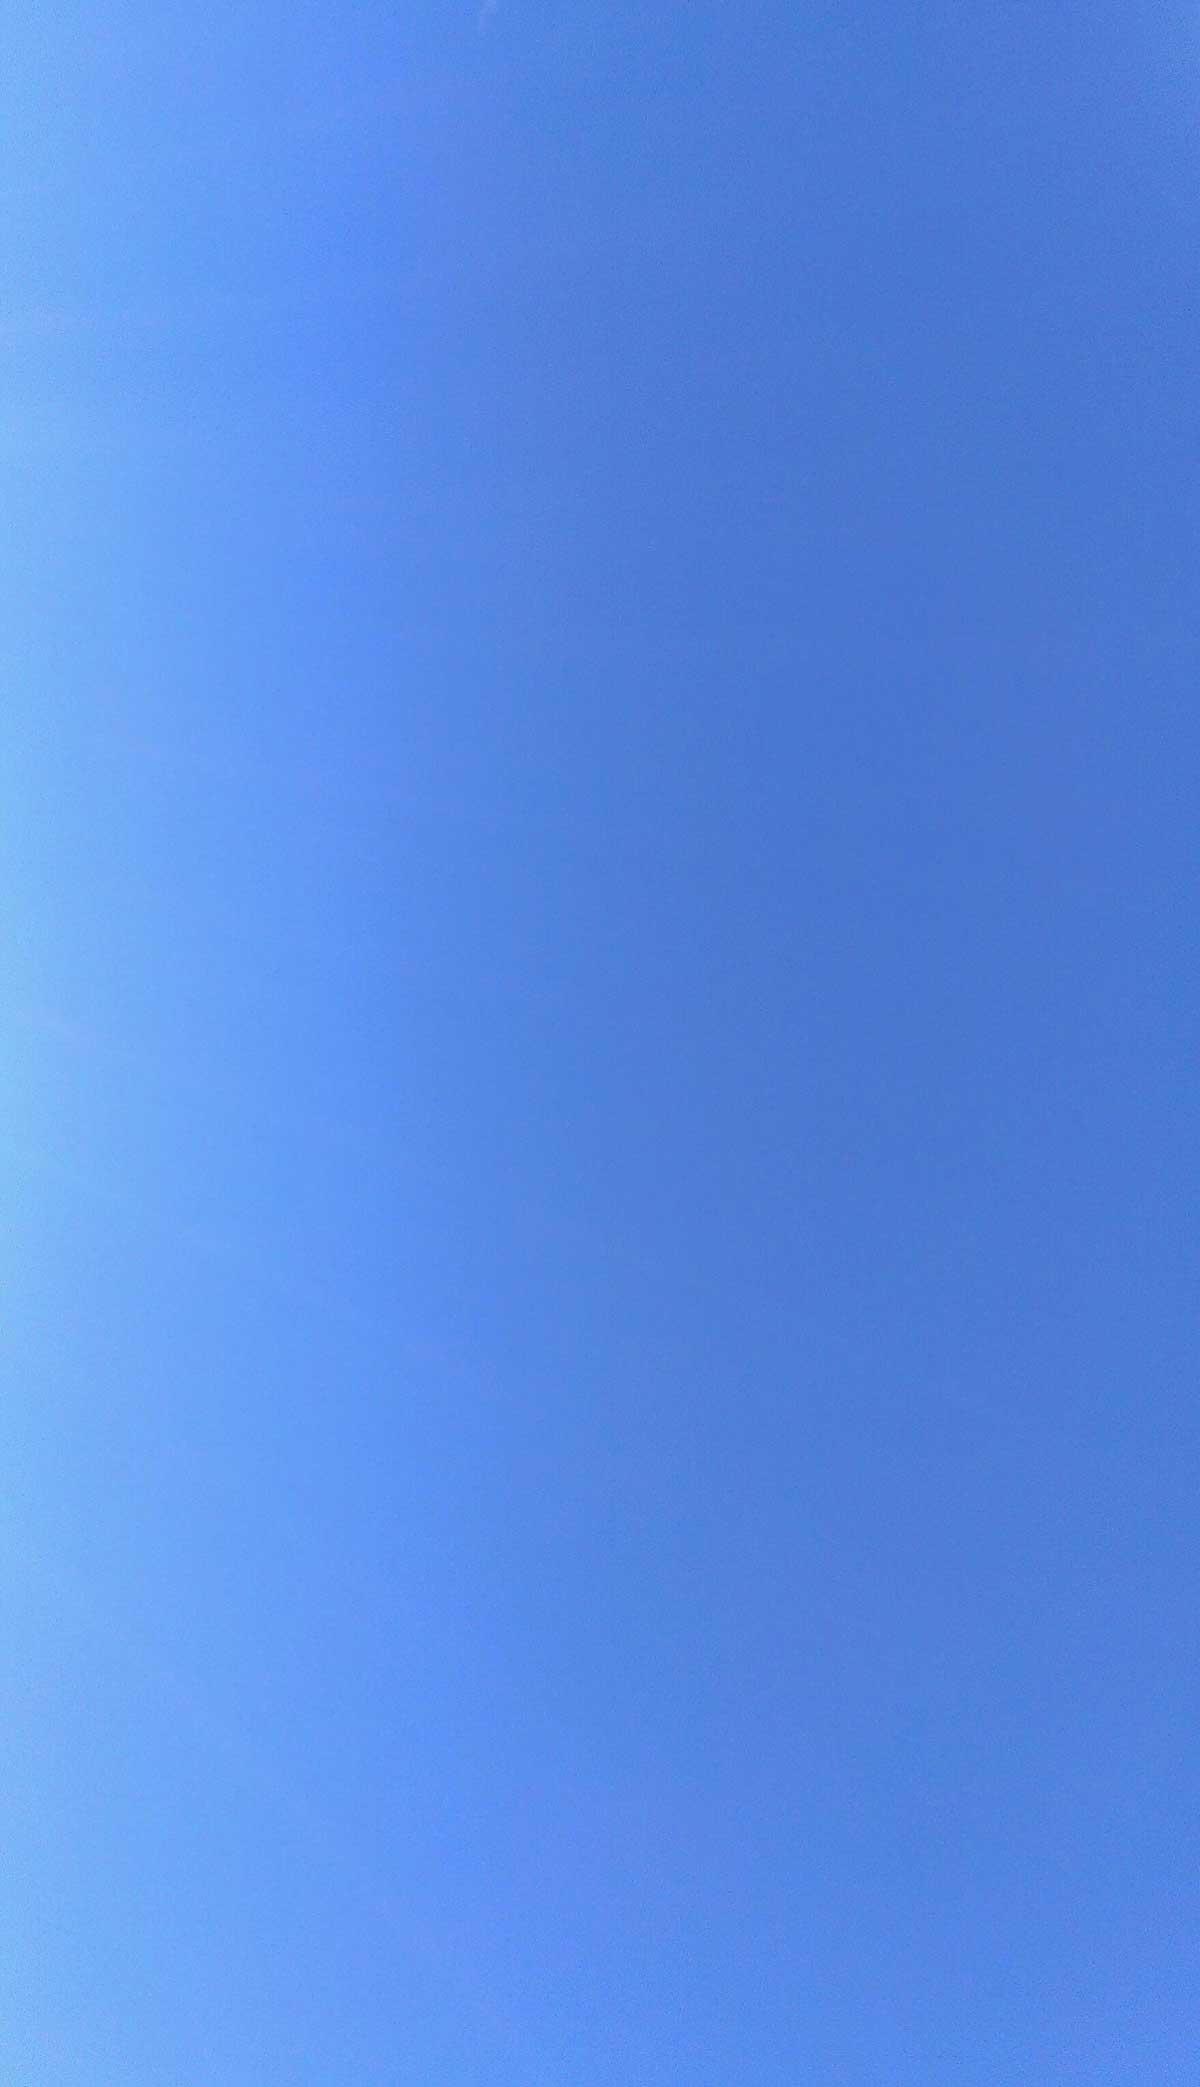 Cloudless blue sky. Picture by Sarah Bennett